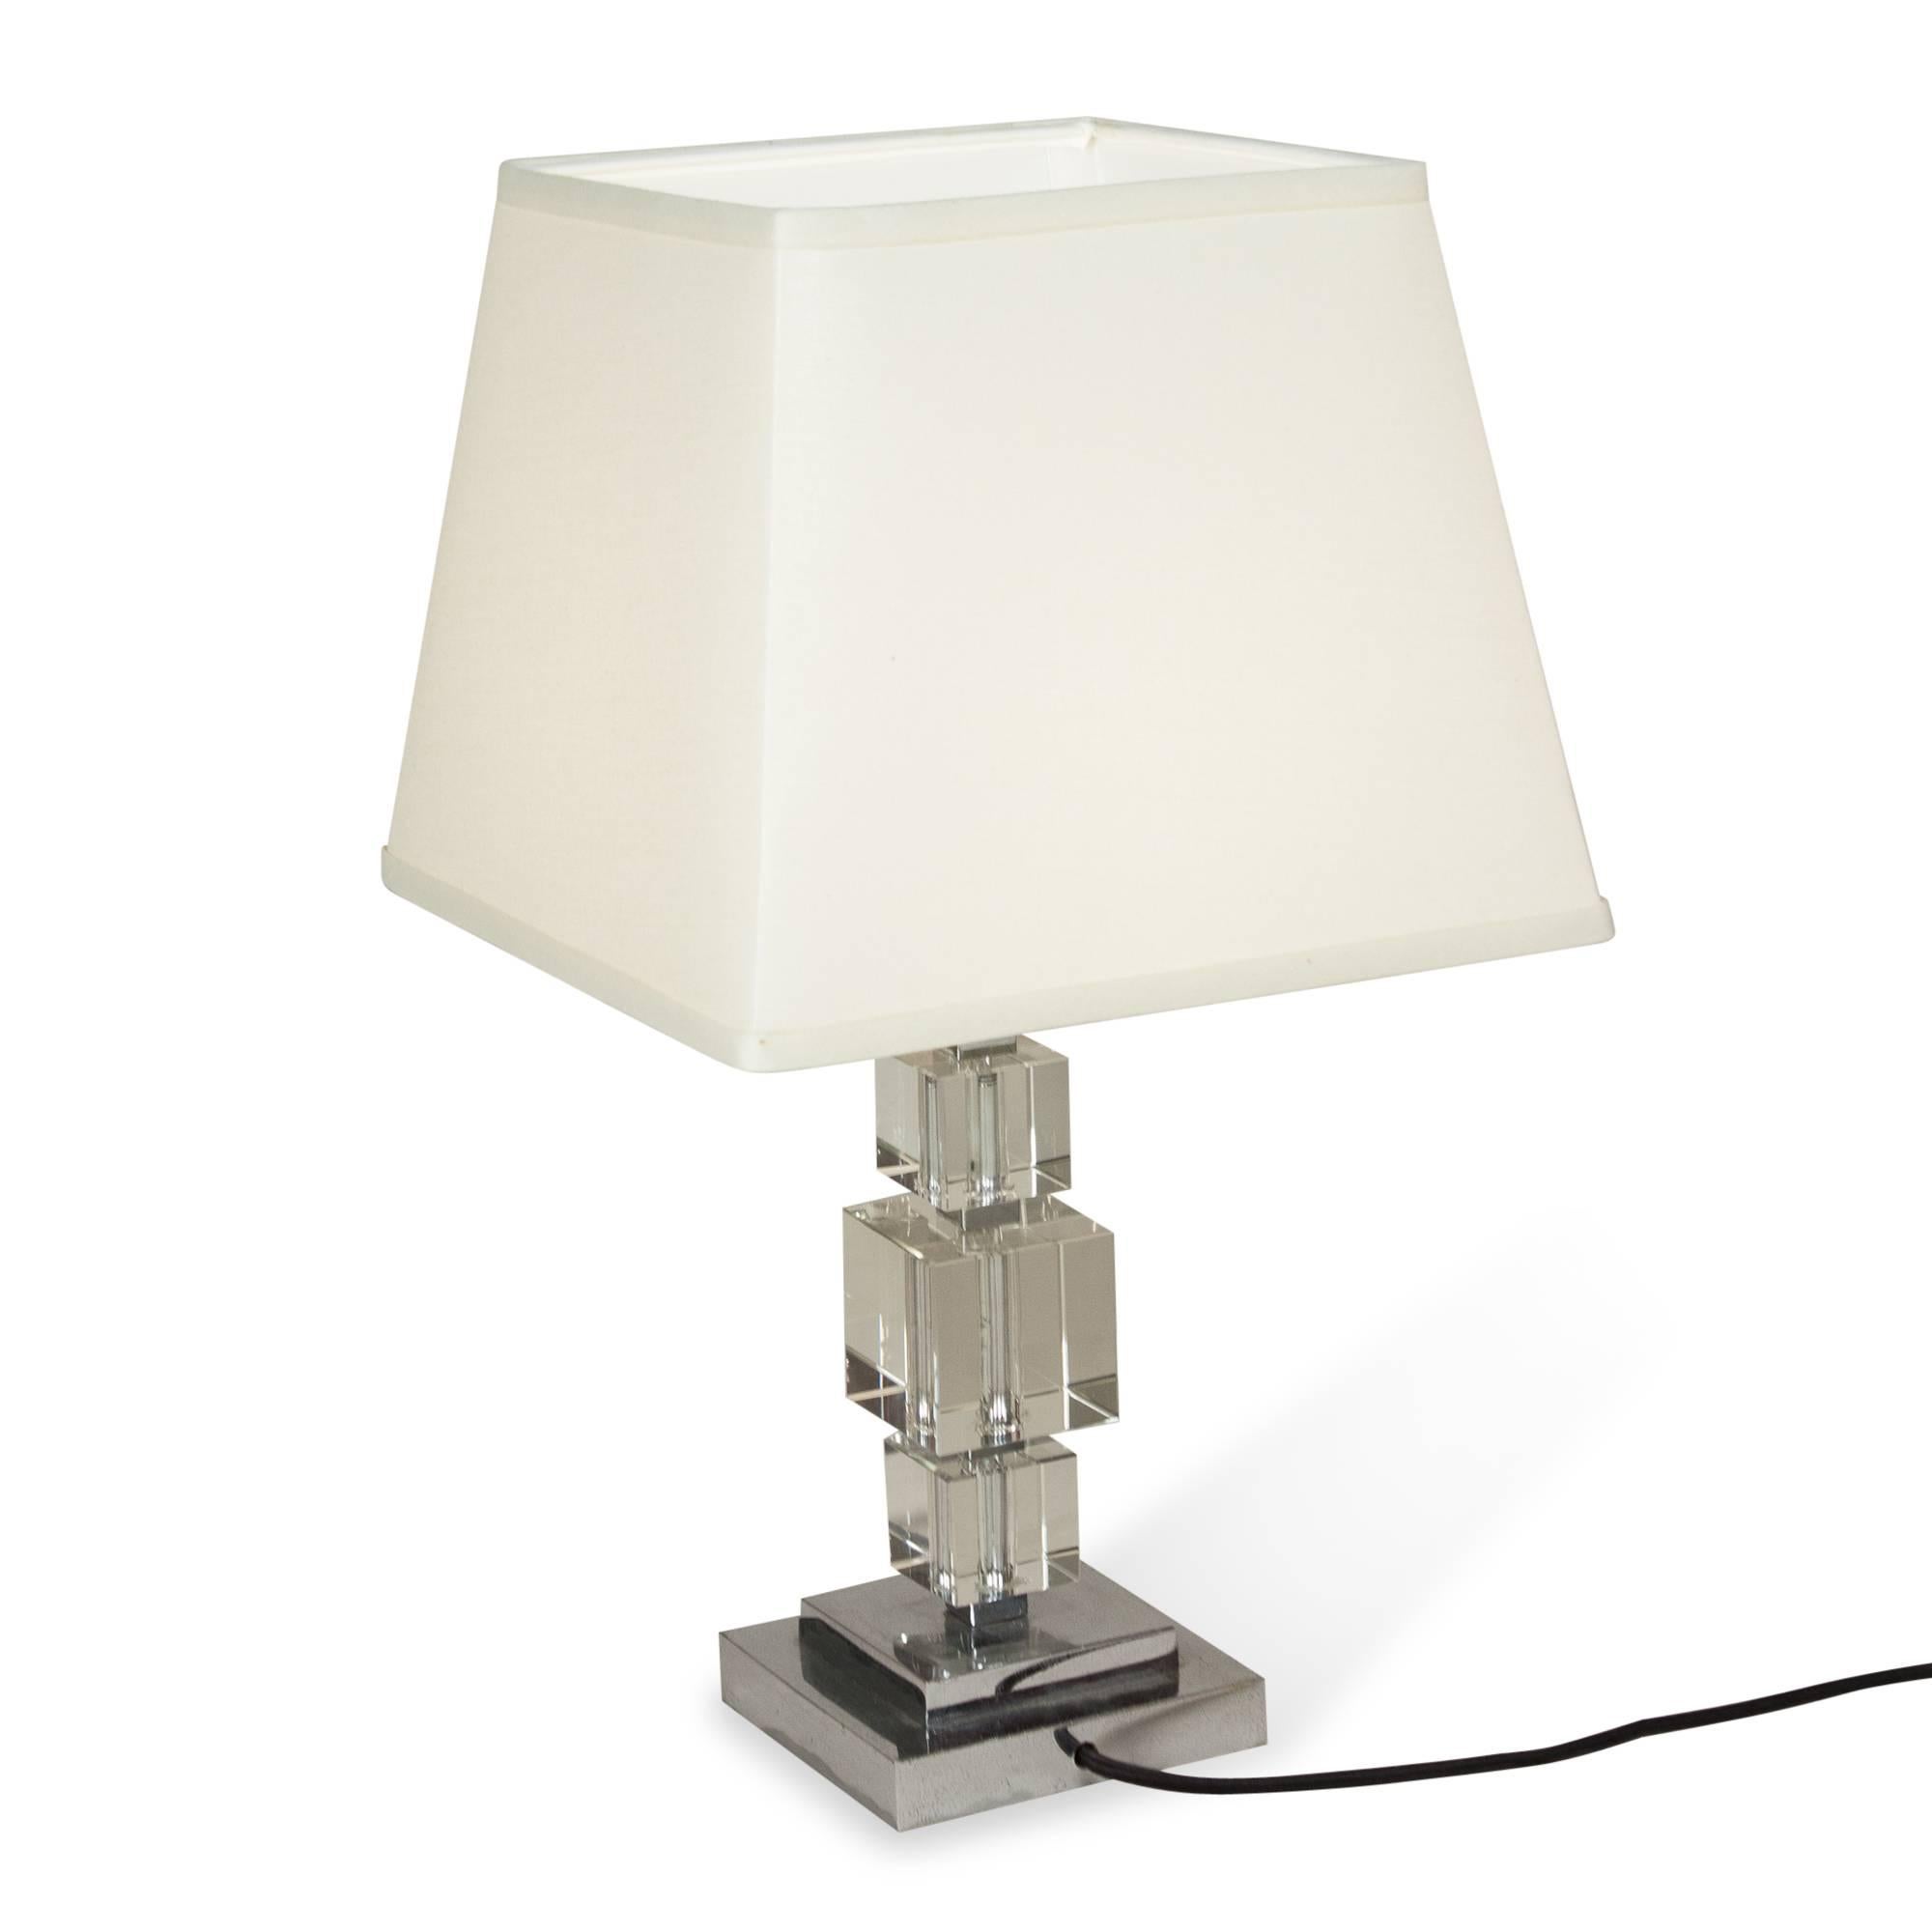 Mid-20th Century Crystal Cube Table Lamp, French, 1930s For Sale